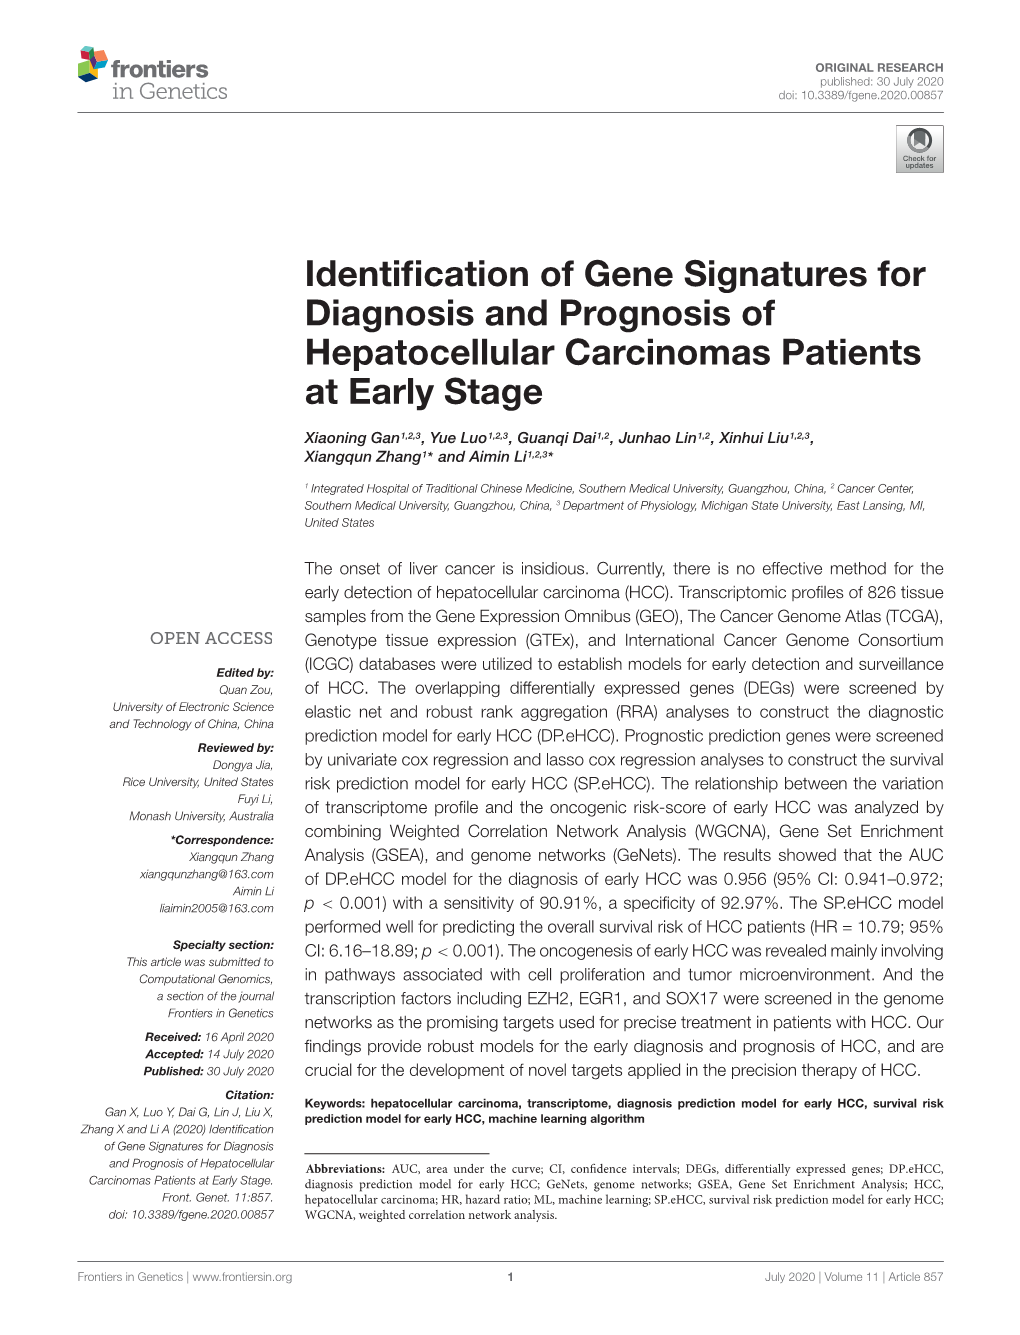 Identification of Gene Signatures for Diagnosis and Prognosis of Hepatocellular Carcinomas Patients at Early Stage